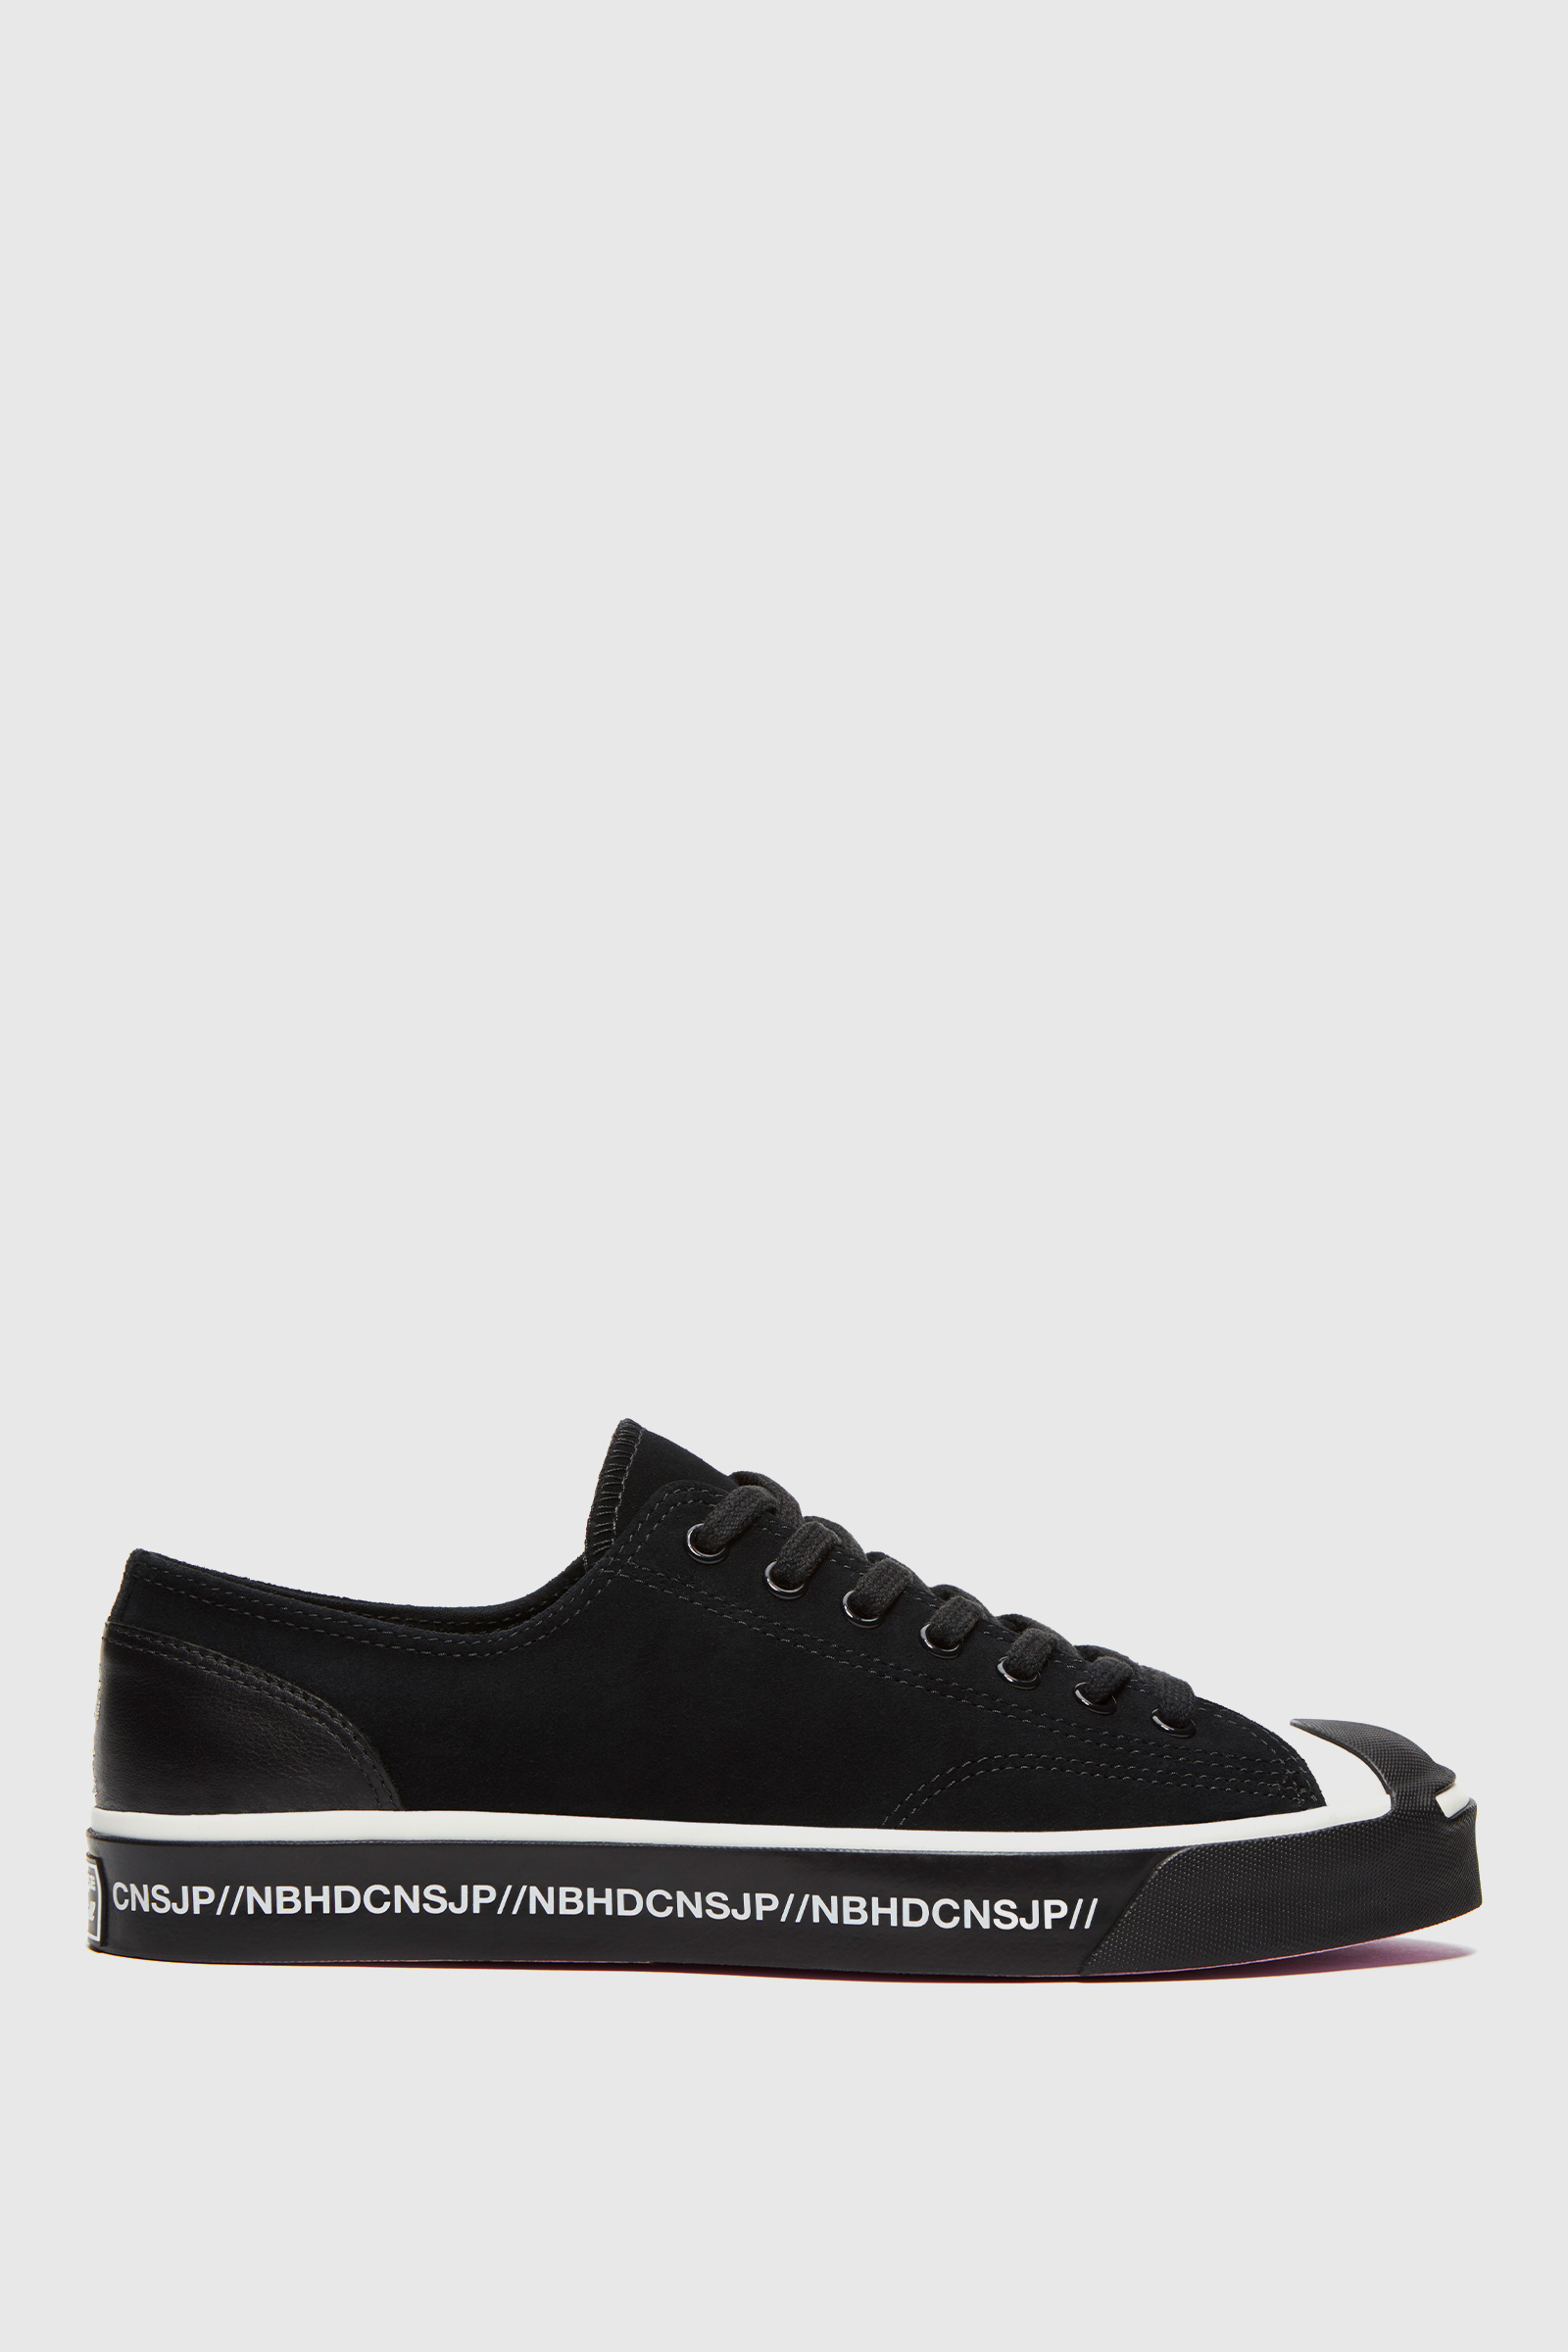 converse jack purcell jack ox